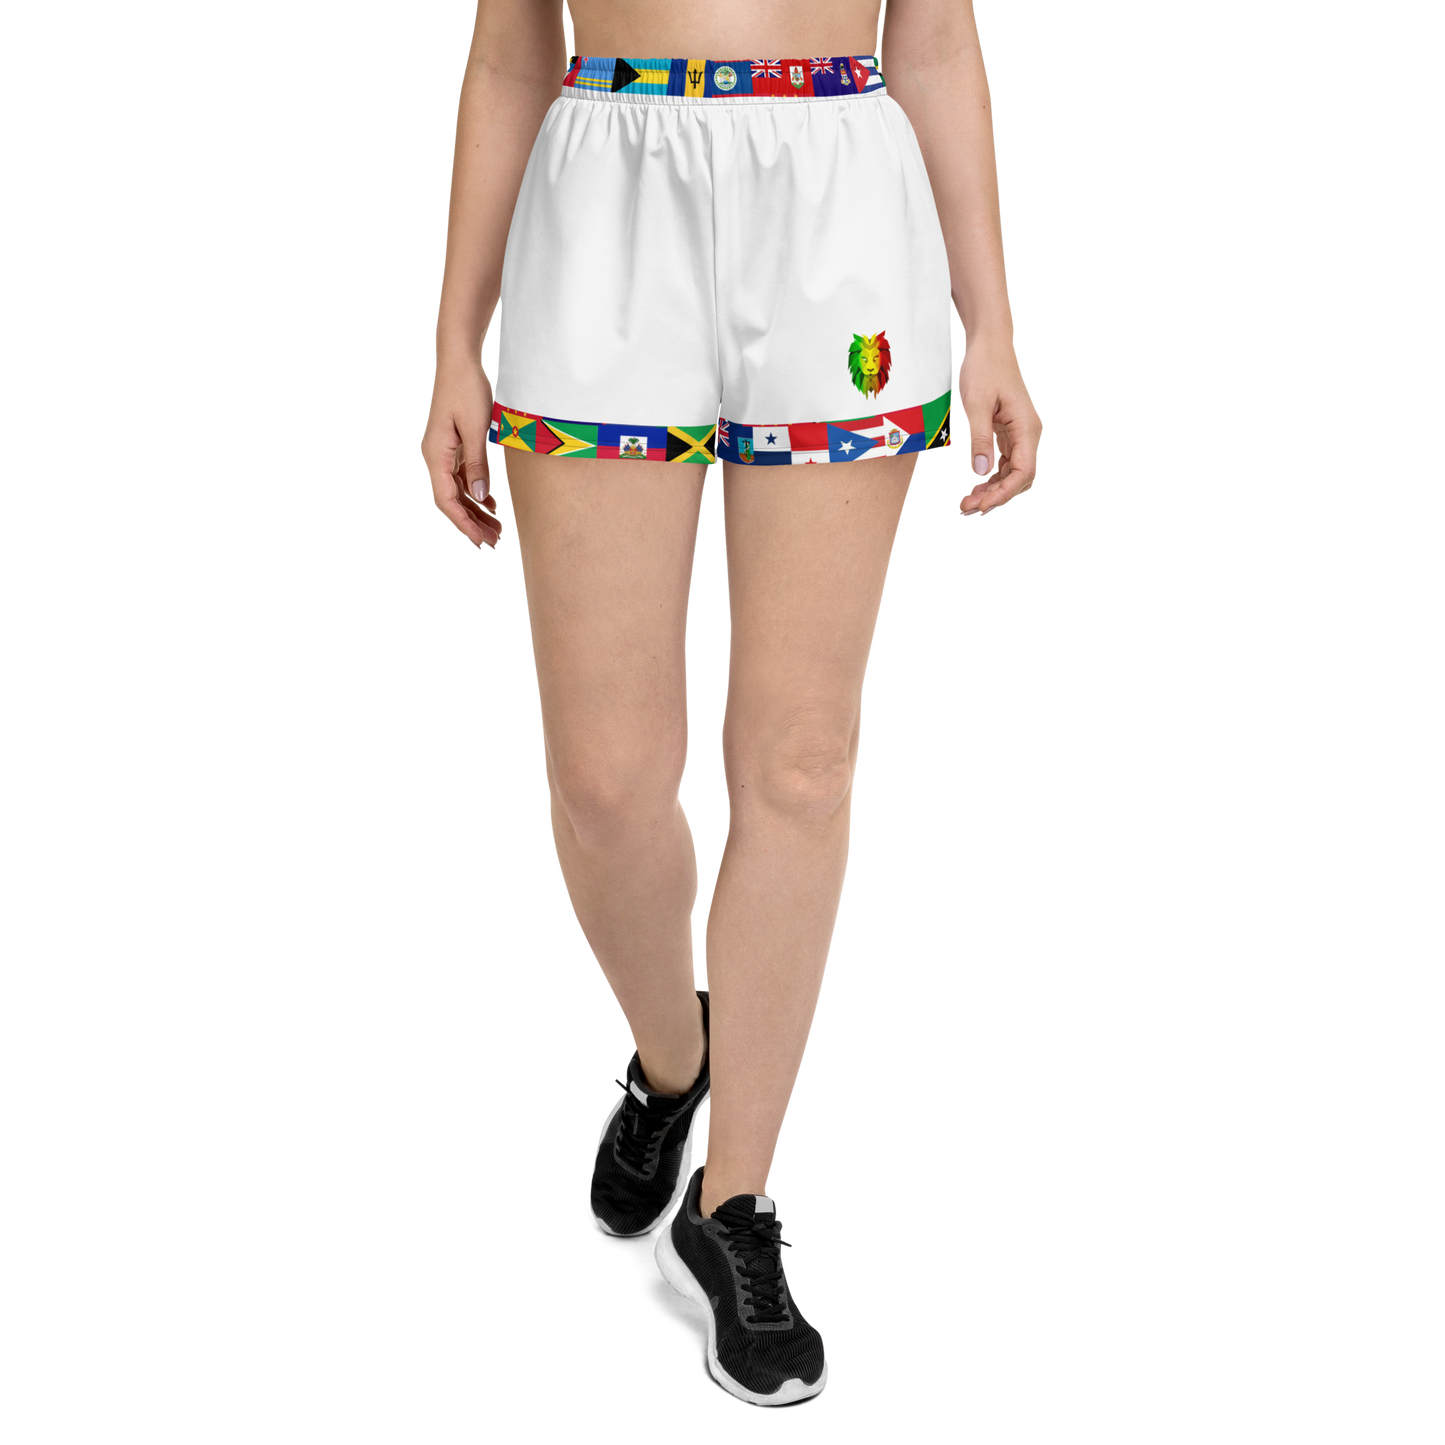 West Indian Women’s Athletic Shorts